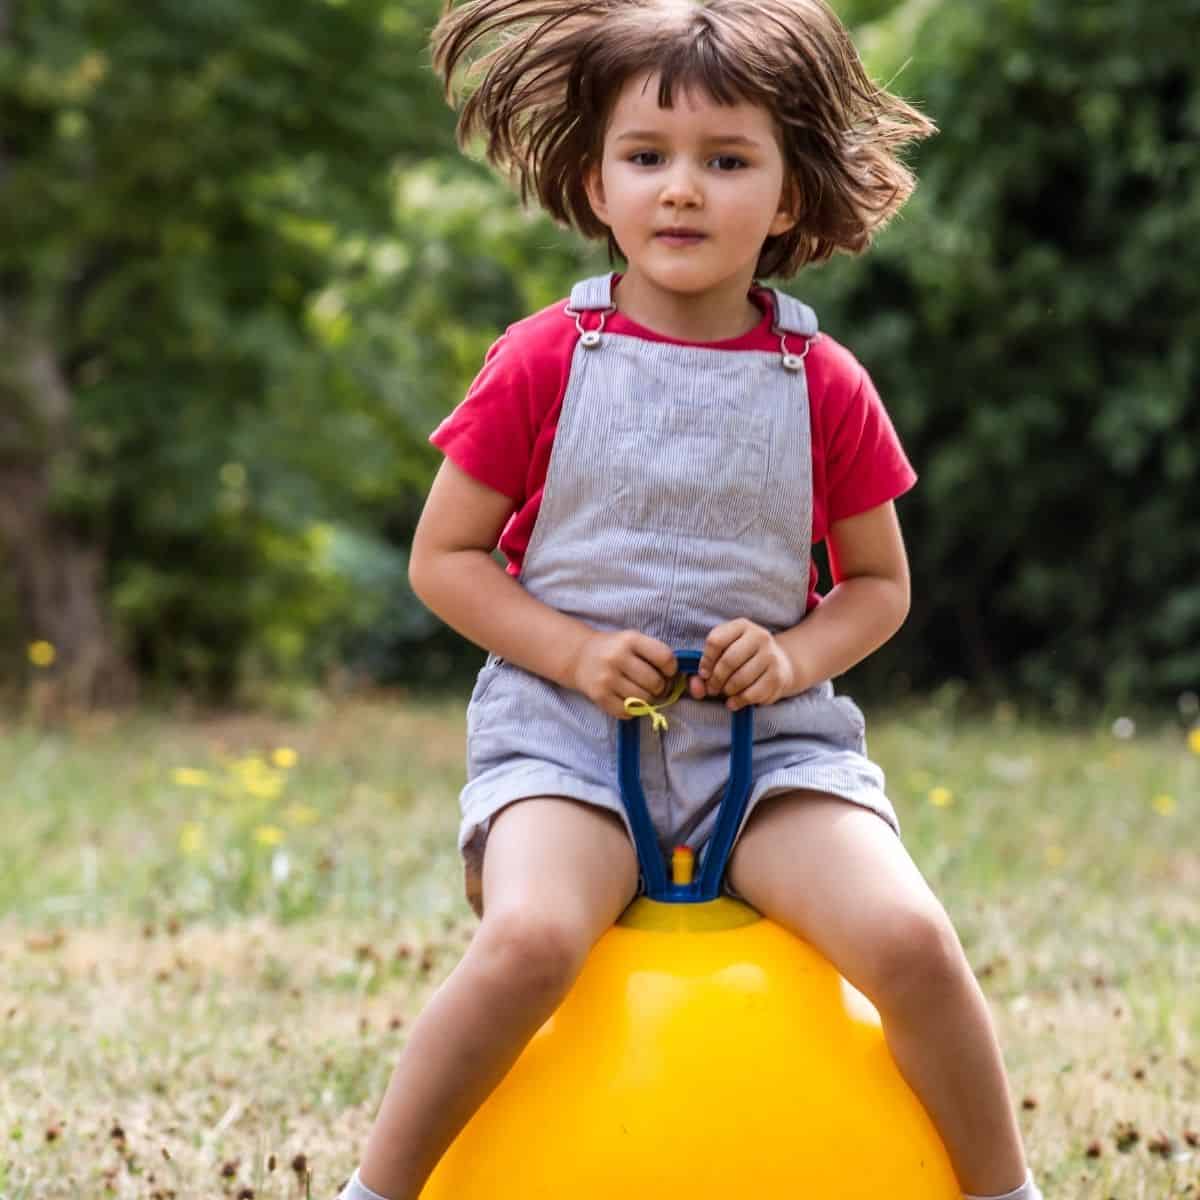 Core exercises help kids gain strength for fine motor activities.  Core strength starts to develop in babies!  The strength and stability continues to develop as a child grows through toddler, preschool, and school-age years.